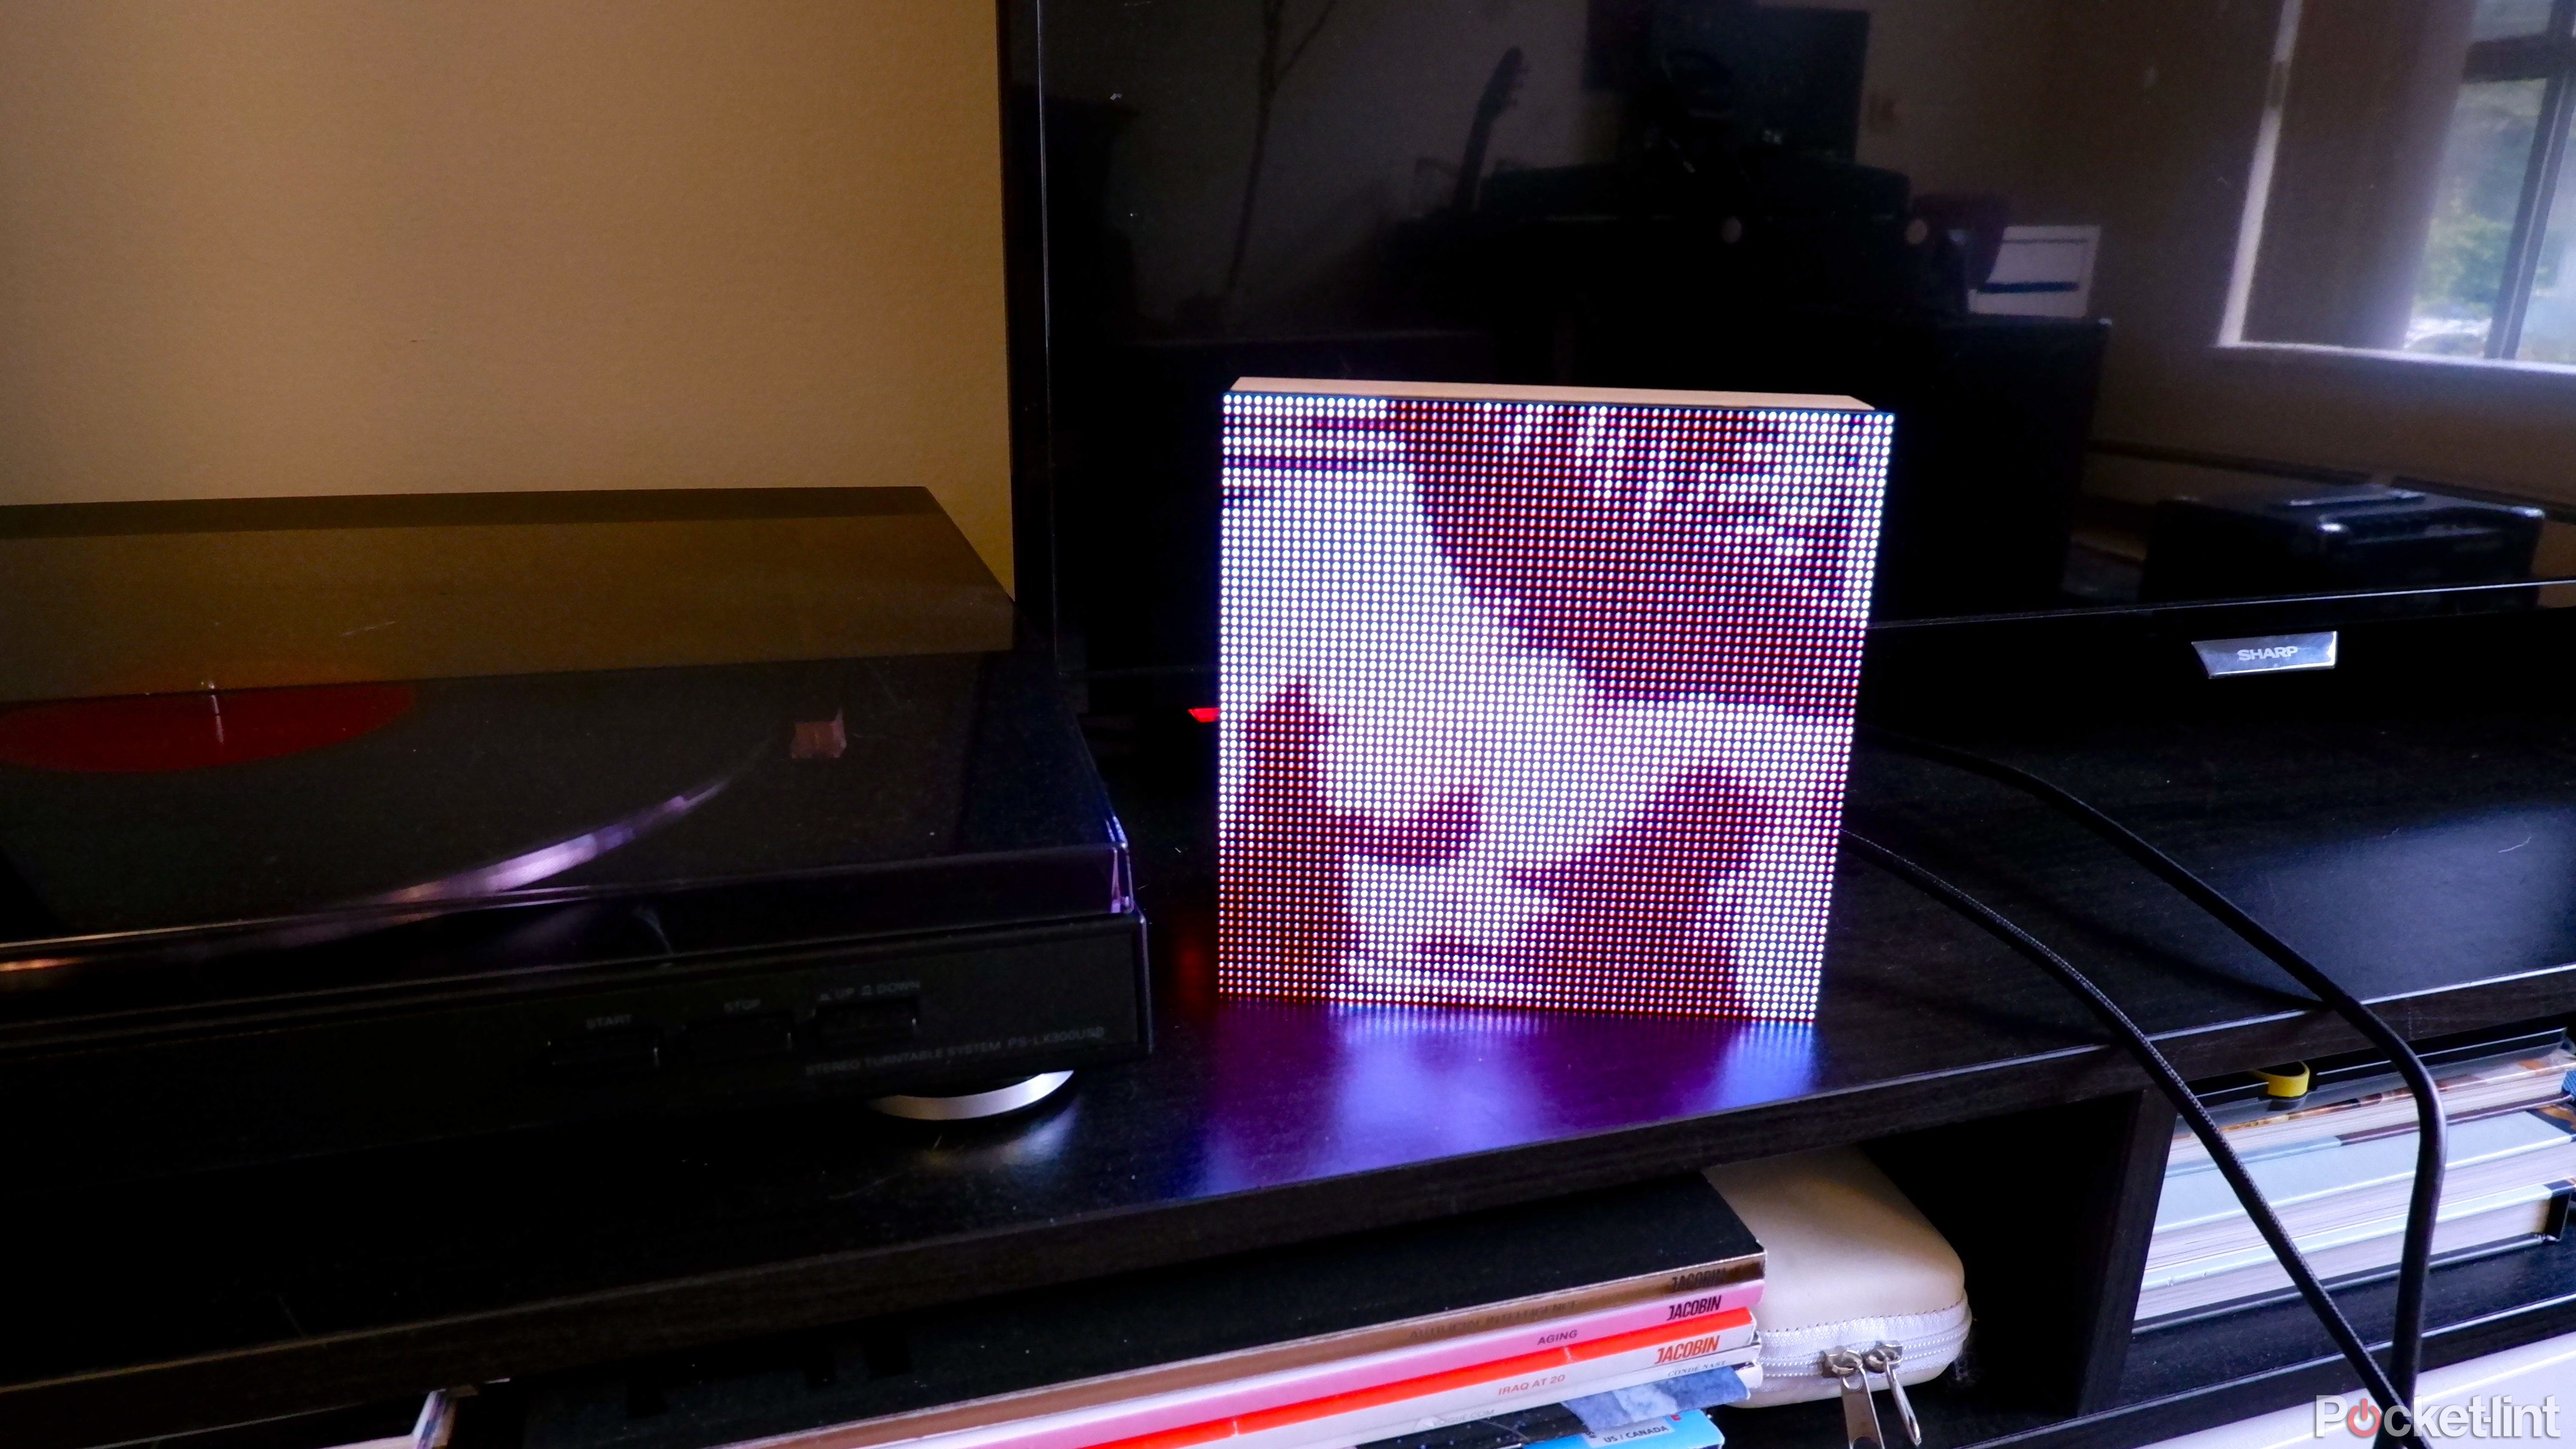 A Tuneshine on a media console beside a TV and record player displaying The Smiths album art.